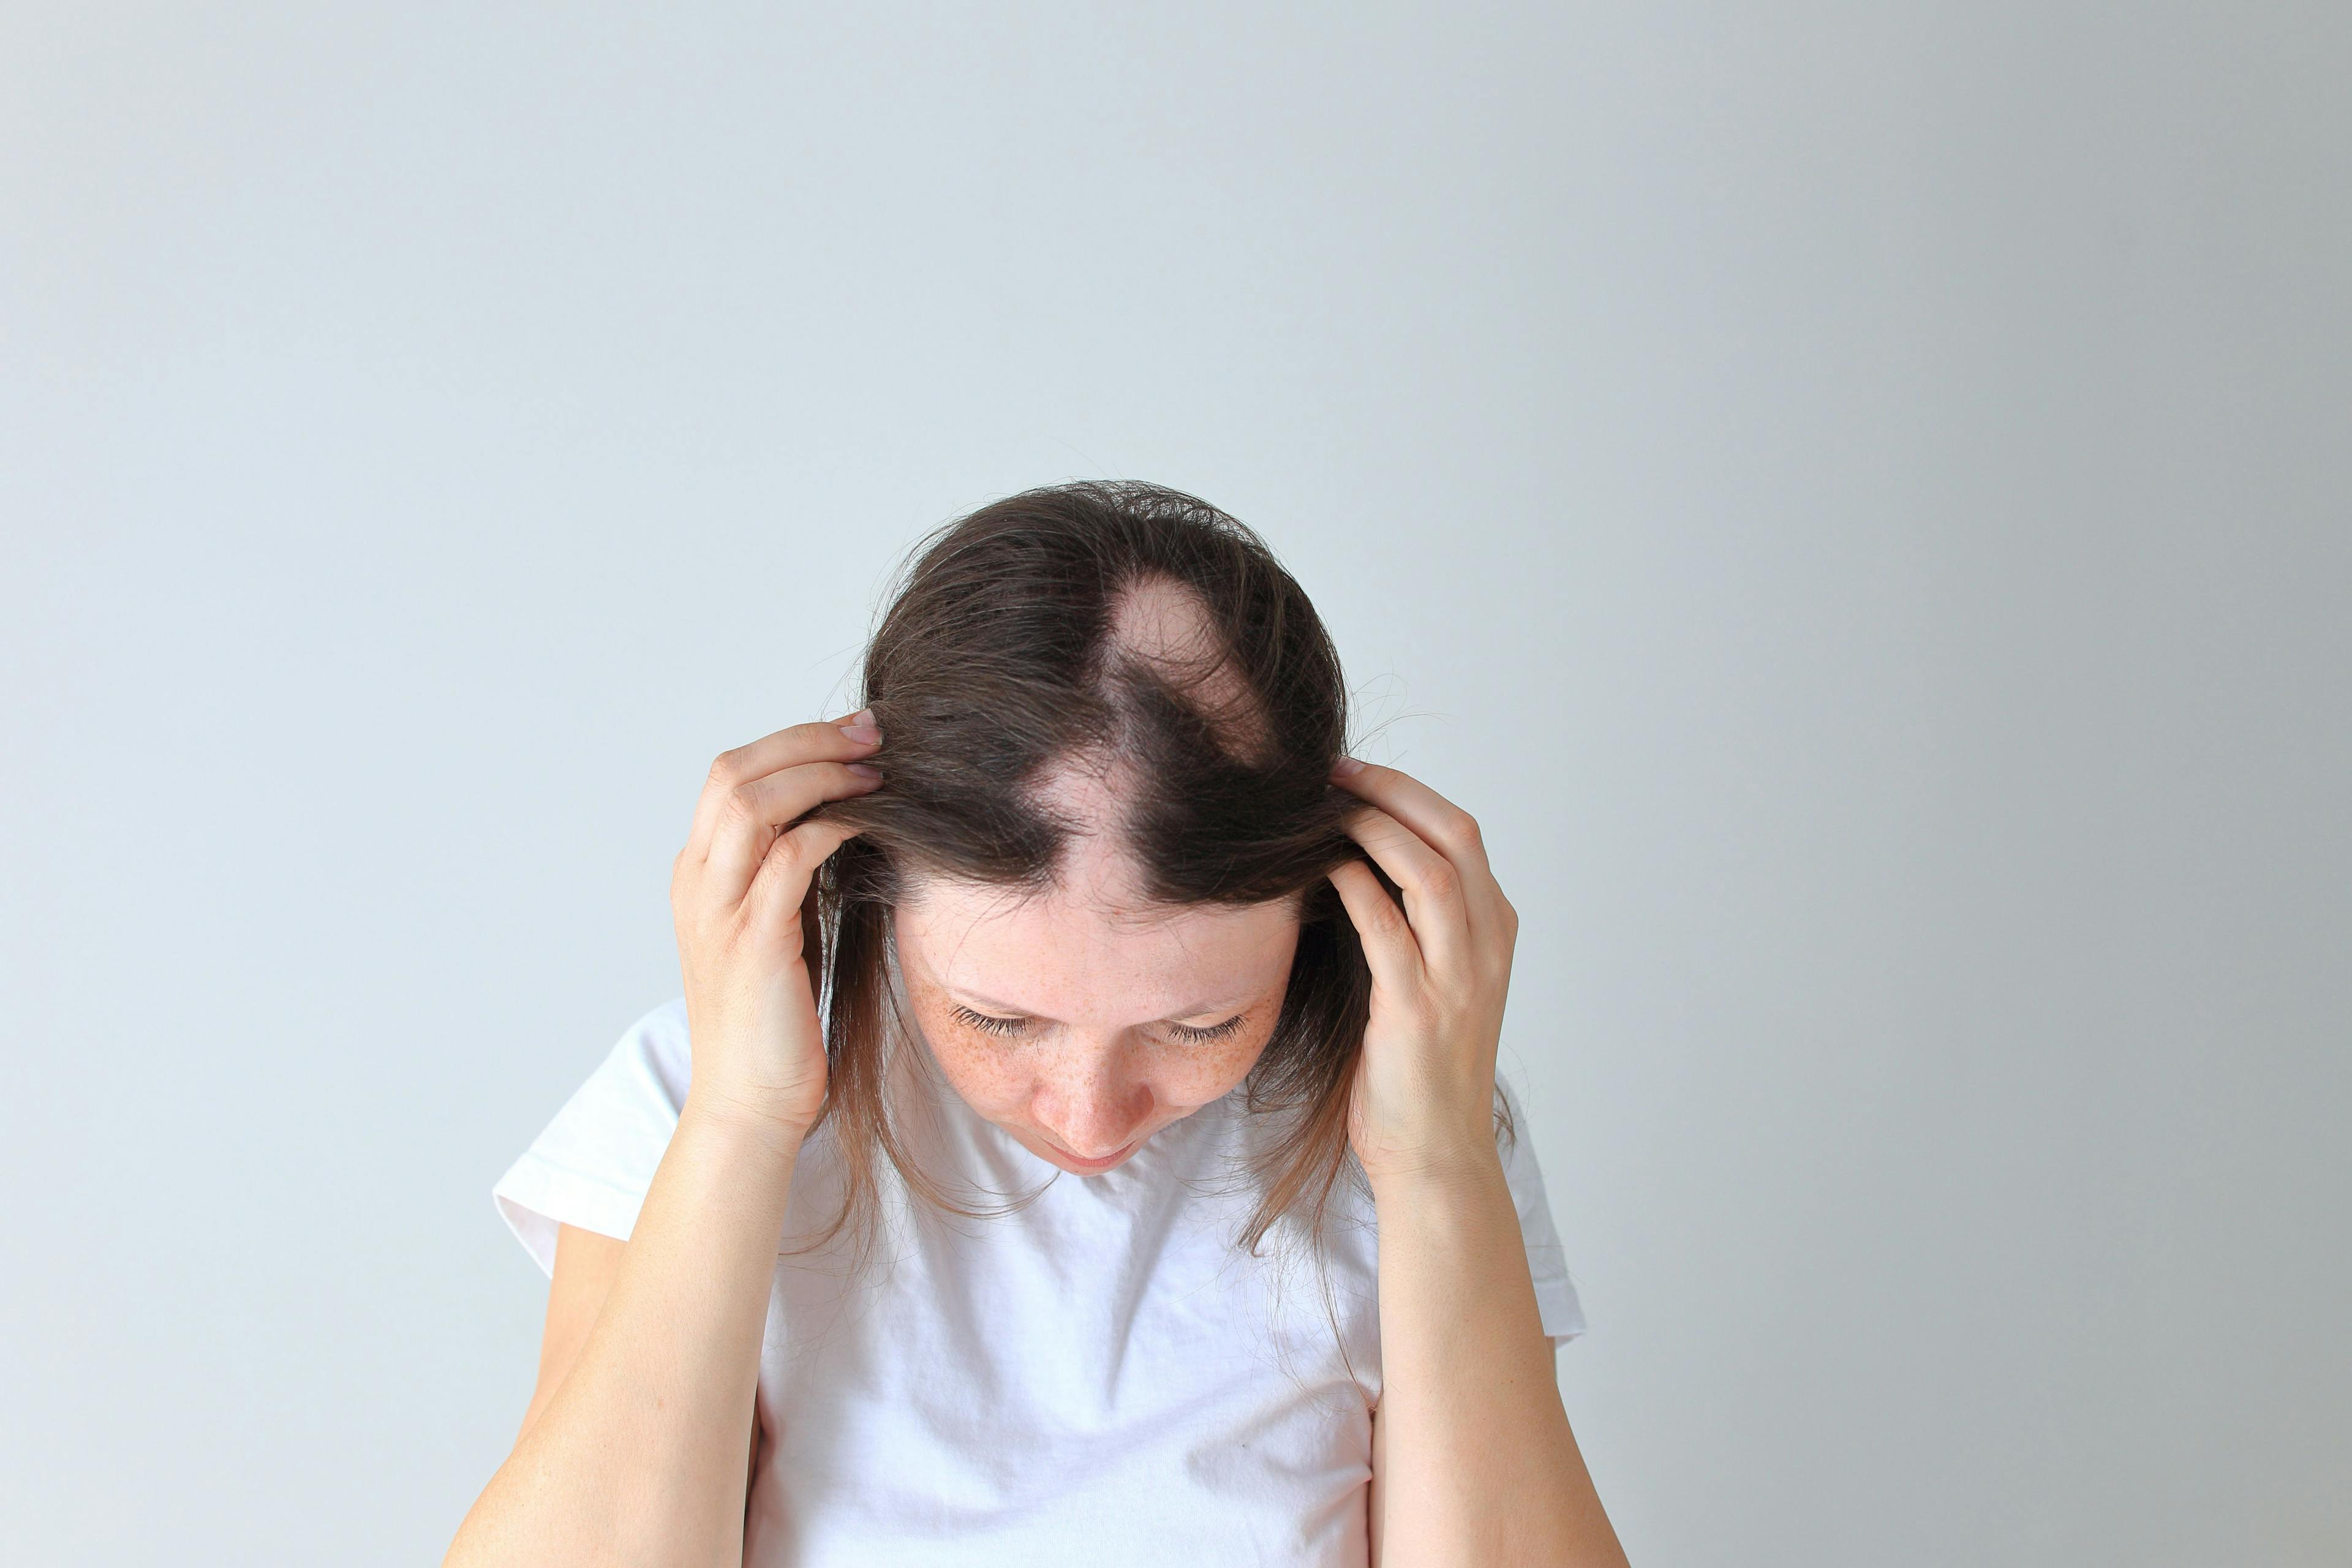 Determining the Incidence and Prevalence of Alopecia Areata